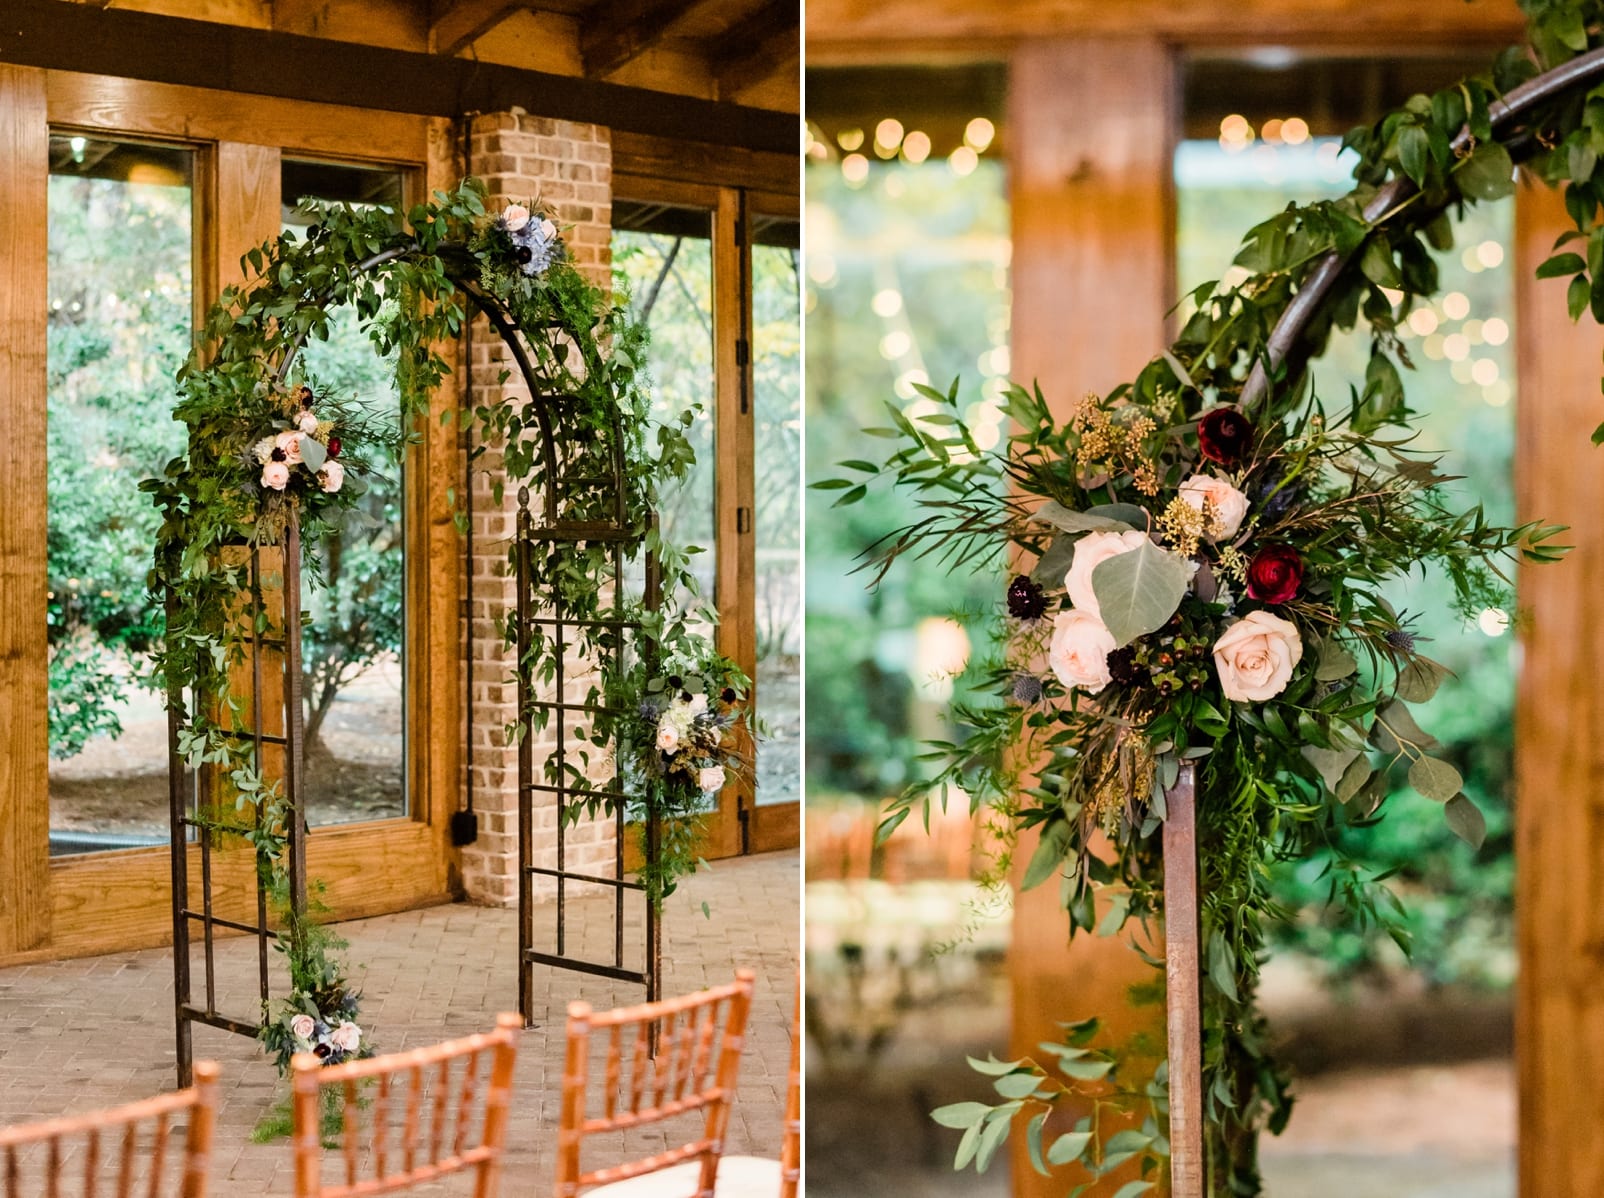 Sutherland Estate pavilion indoor wedding ceremony with metal arch covered in greenery and florals photo